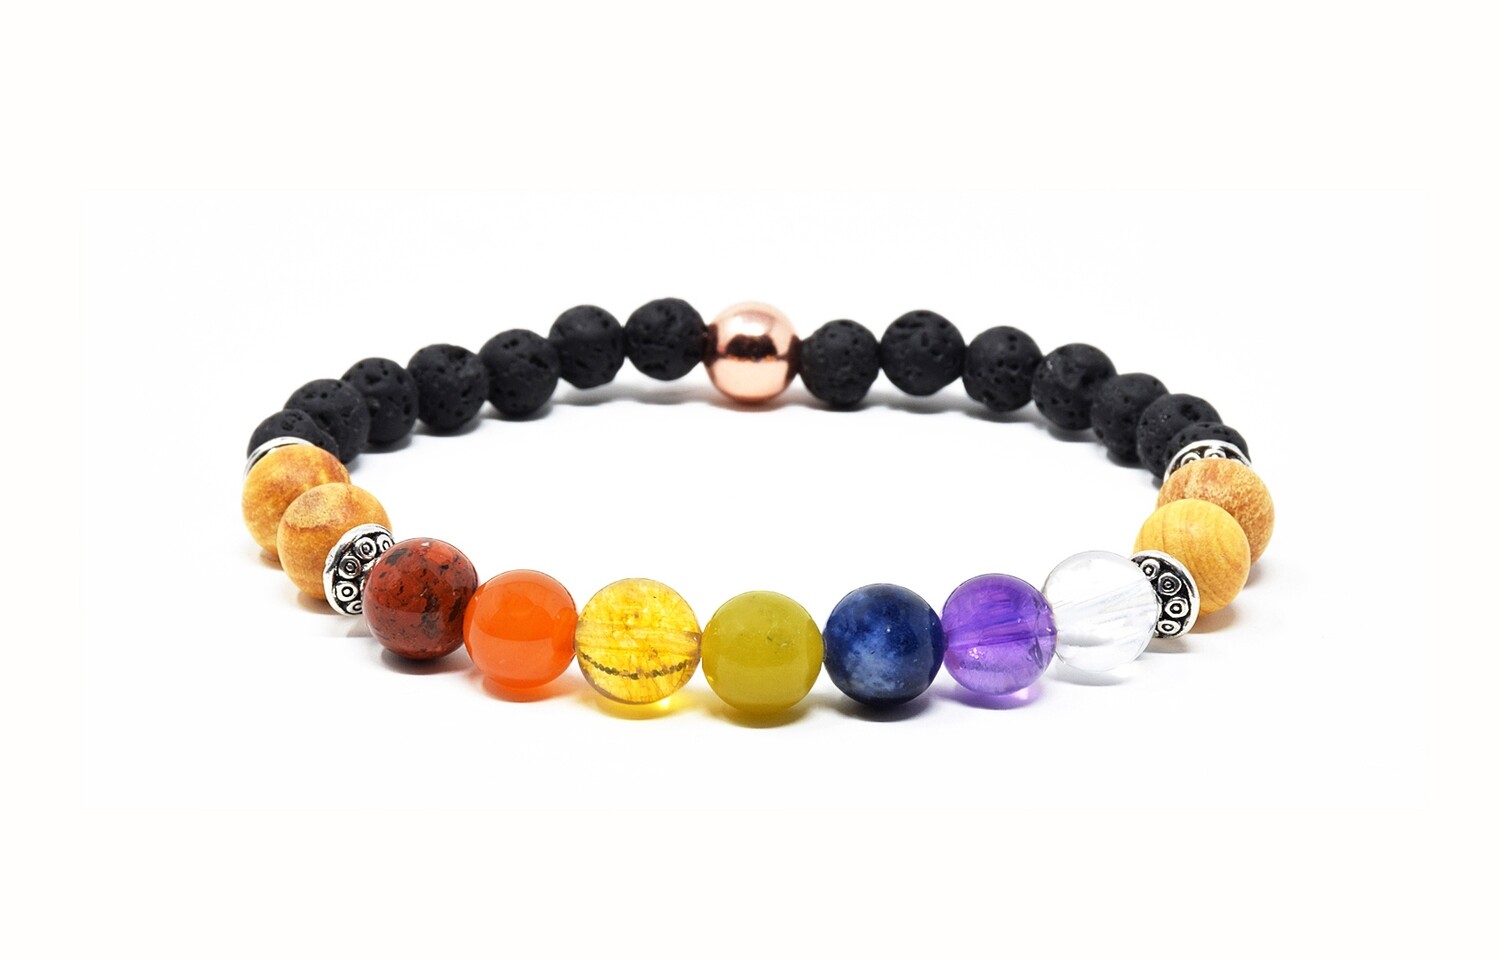 Reiki Charged 7 Chakra Gemstone Bracelet With Palo Santo, Lava Stone & Pure Copper Accents (Fits wrists up to 6.75")